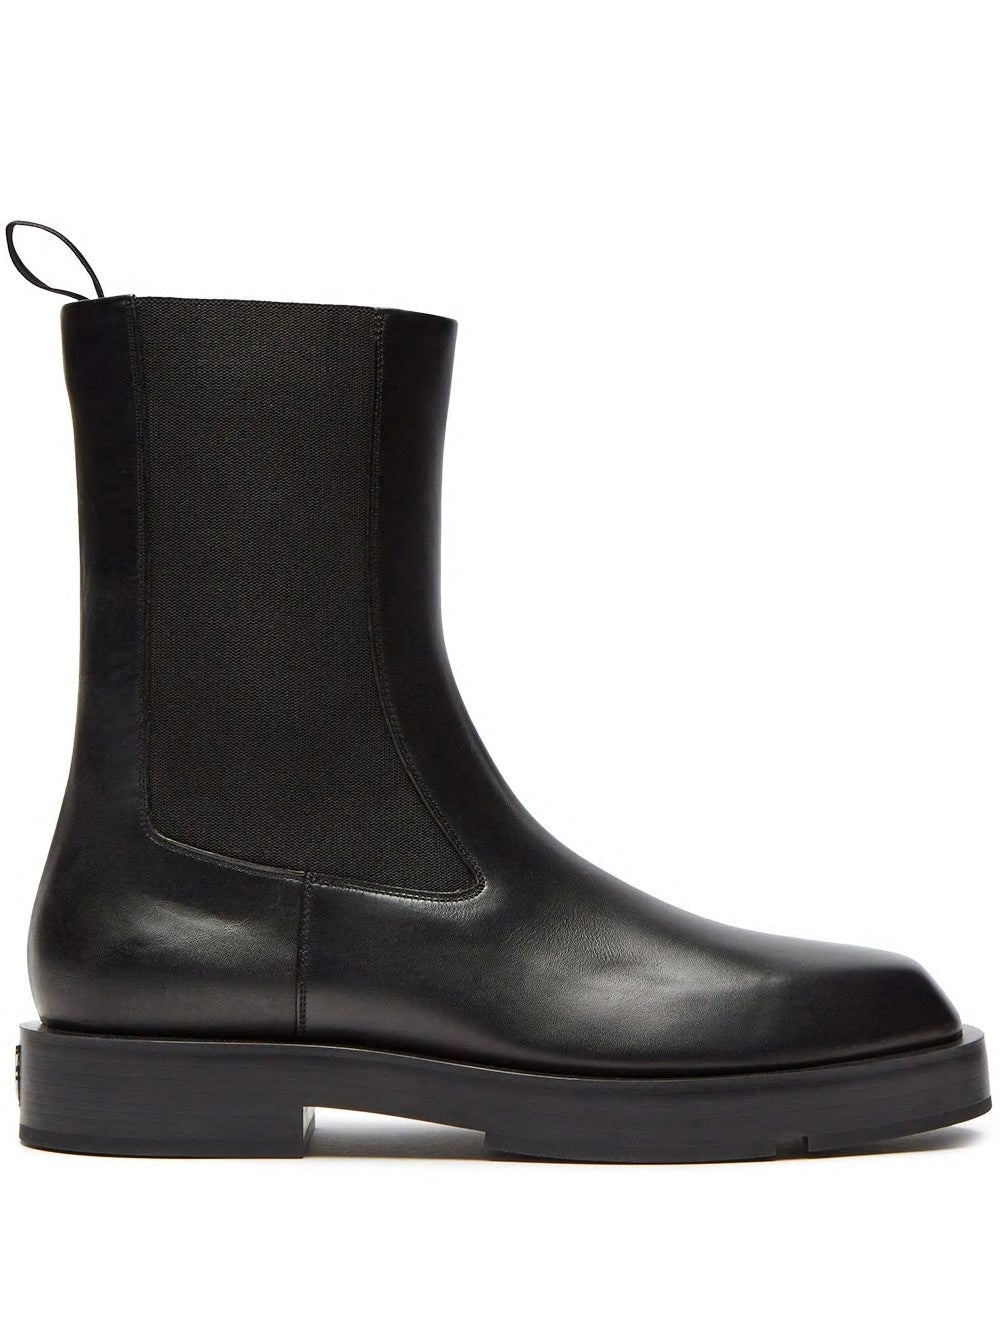 Black Square Chelsea Ankle Boots for Men